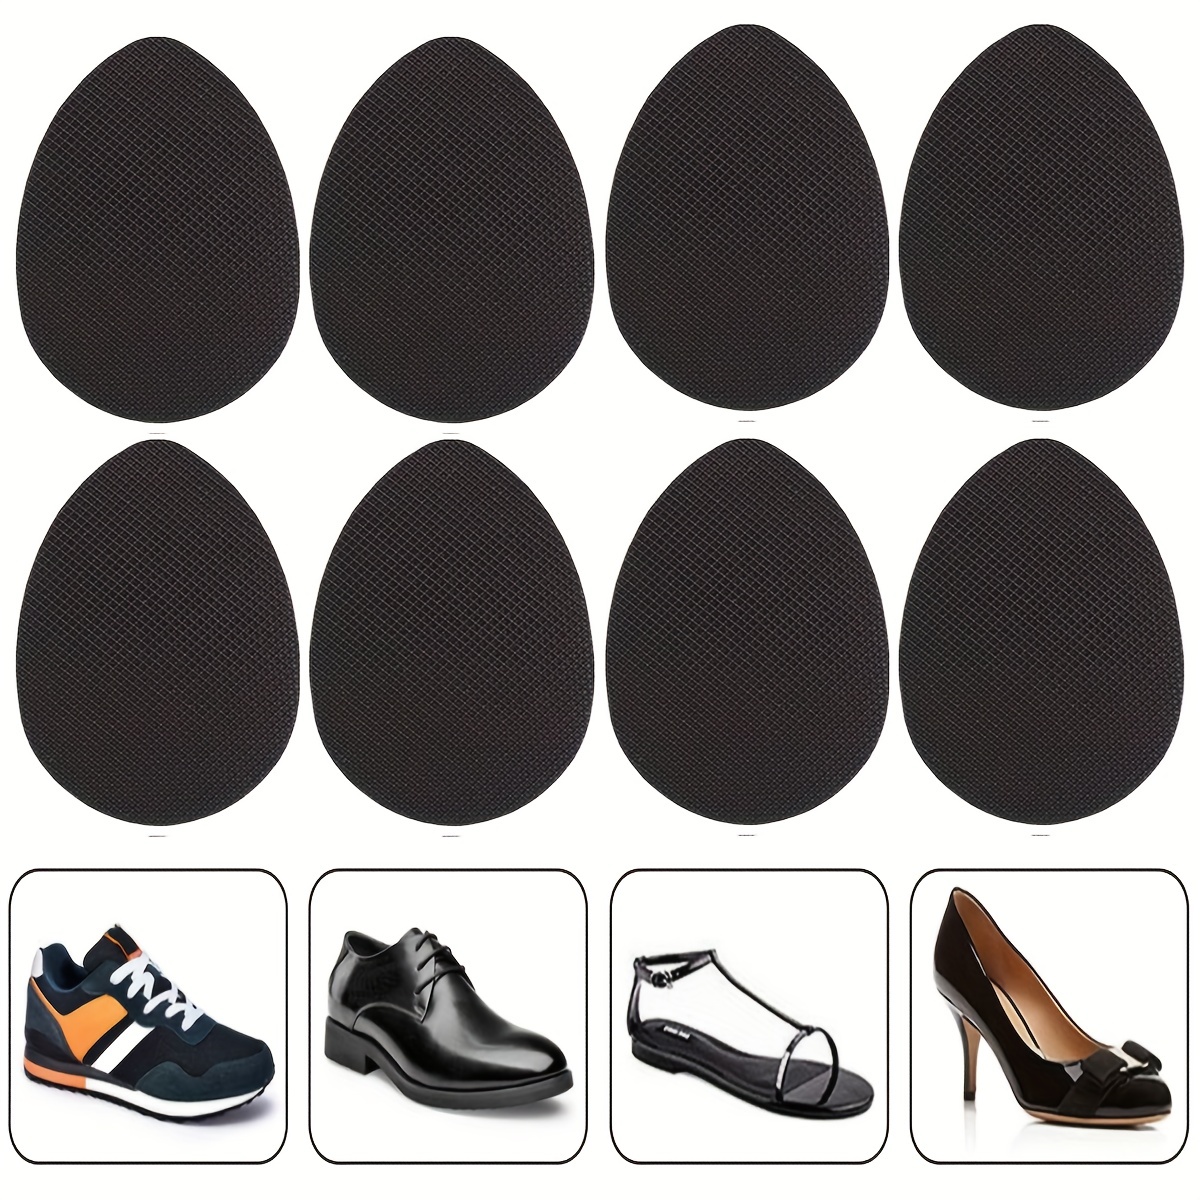  A Pair Boot Heel Replacement Pads, Non-slip Shoe Sole  Protector, Rubber Sole Protector for Sneakers, Shoe Repair Kit for Women  Men Leather Shoes(Black Forefoot) : Health & Household